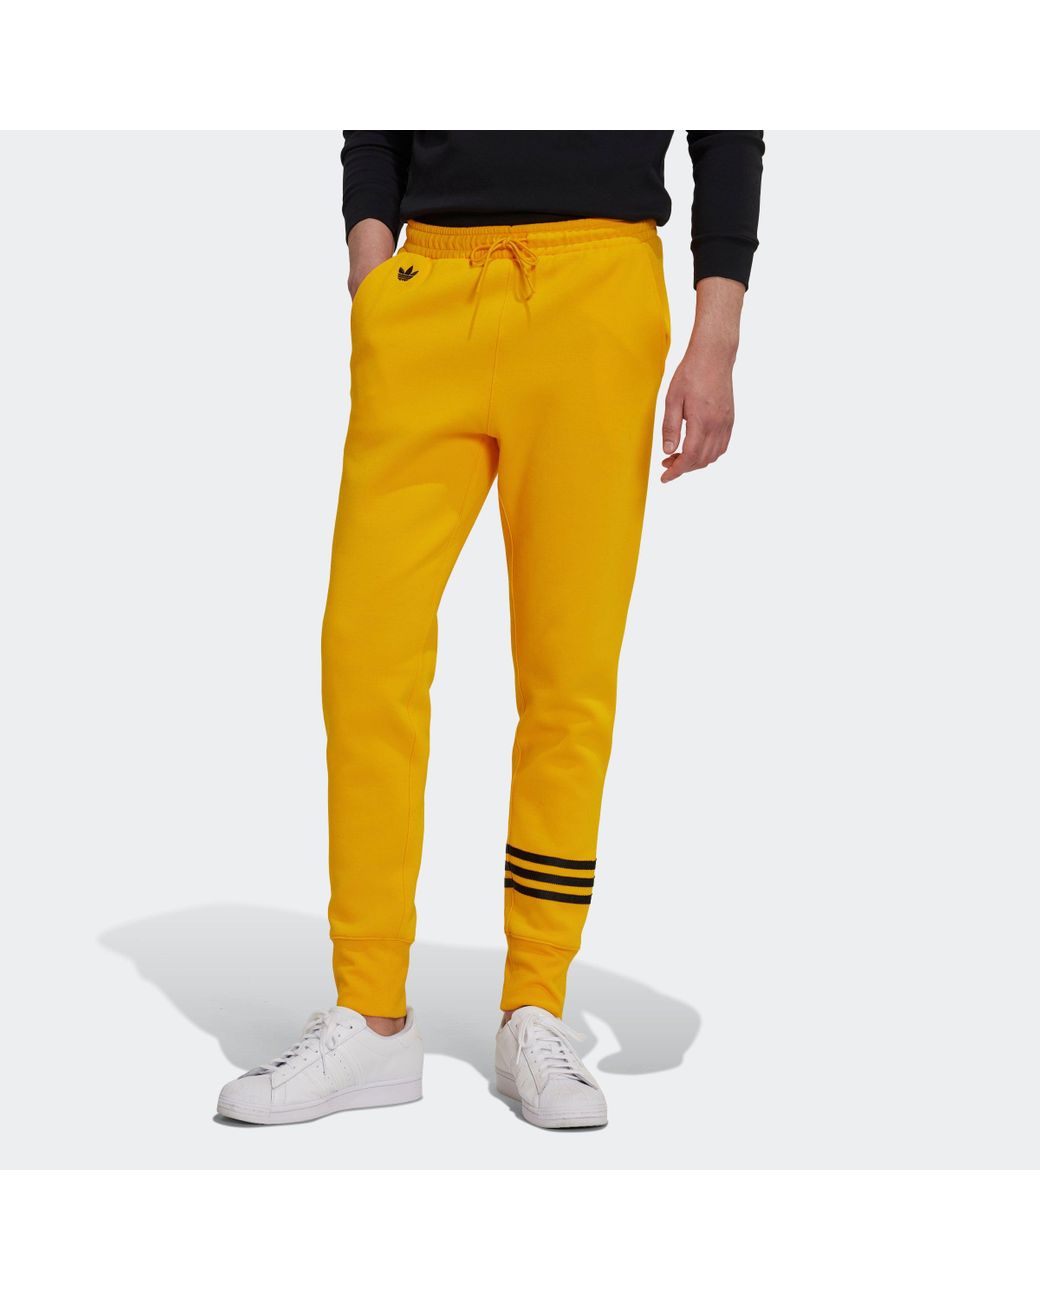 Alan Jones Clothing Solid Boys Regular fit Joggers Track Pant  (BJOG-P32_Yellow_7-8 Years) : Amazon.in: Clothing & Accessories